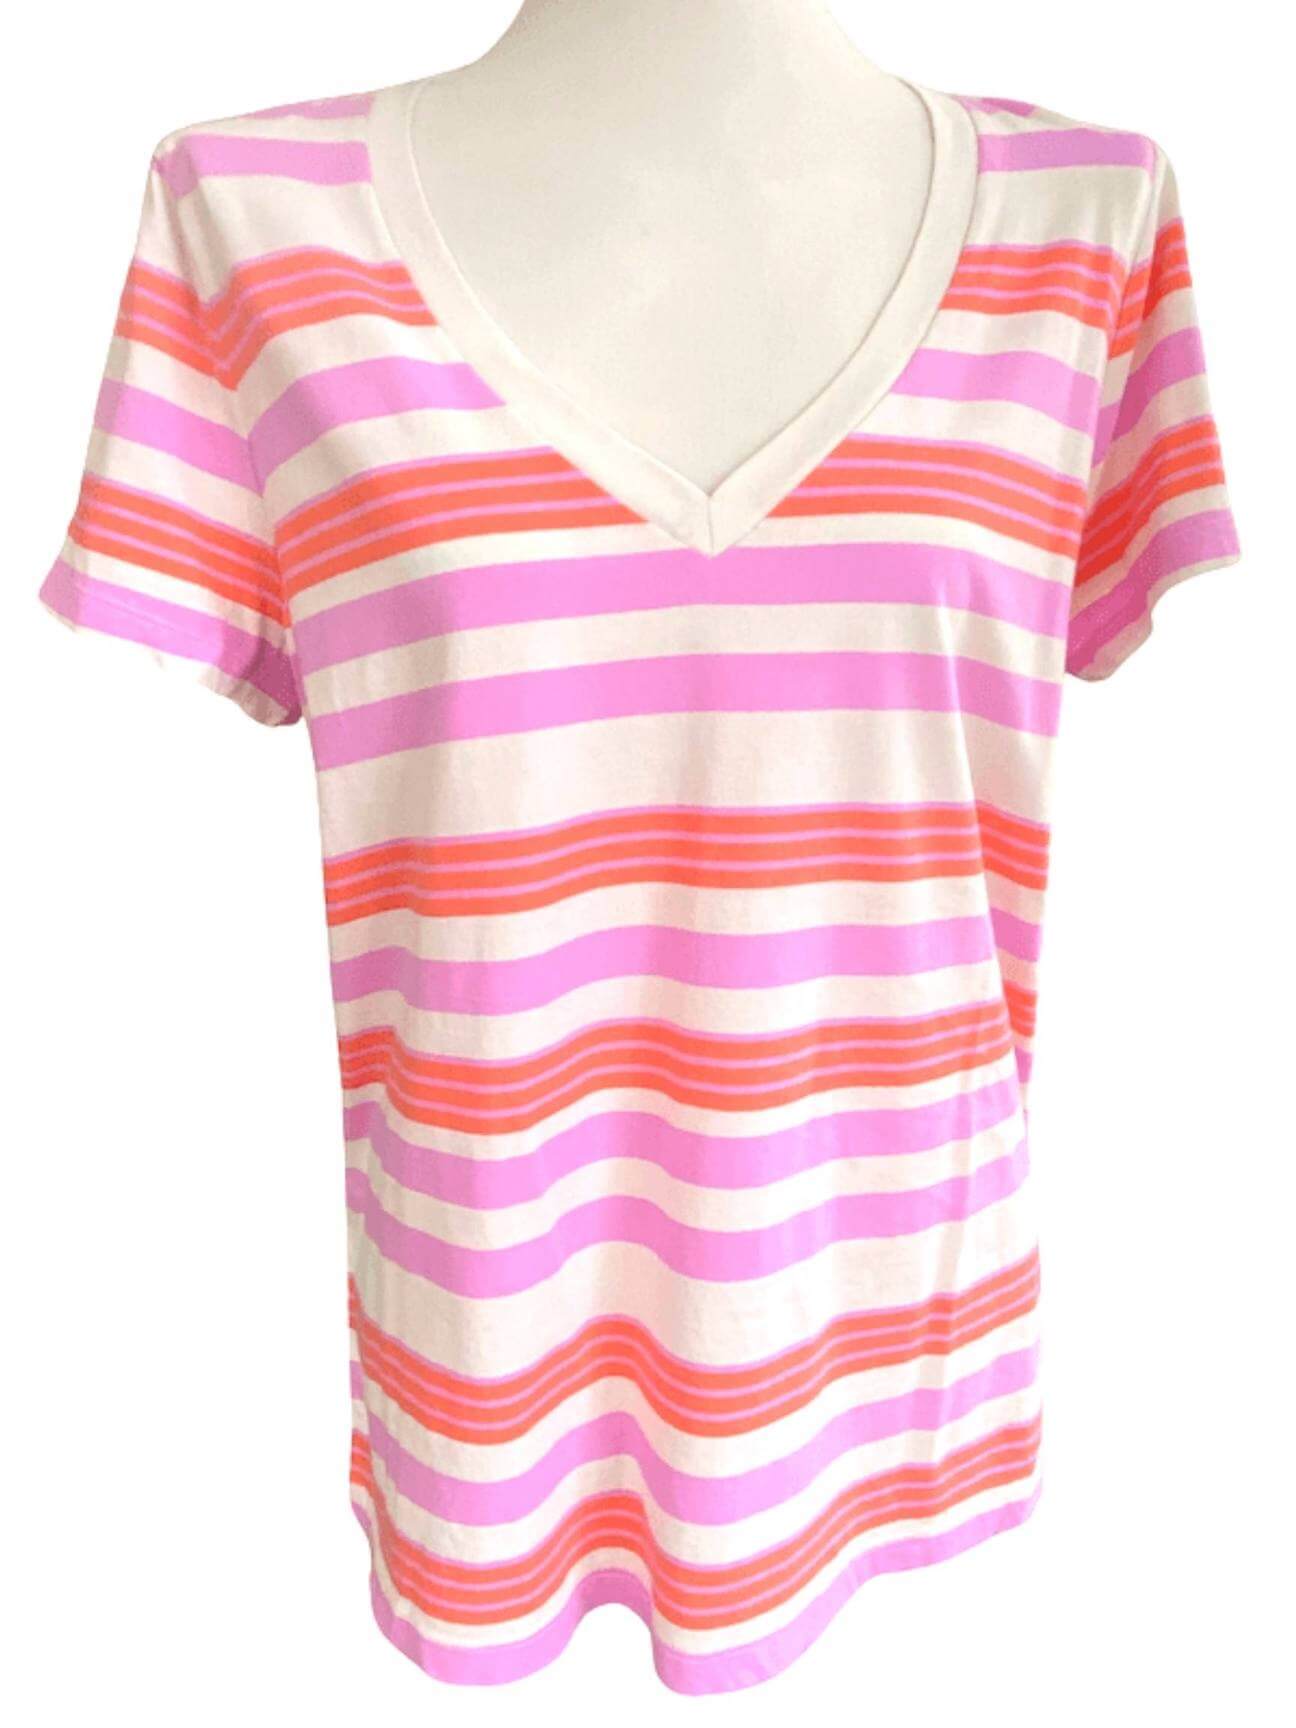 Bright Spring GAP coral pink striped tee